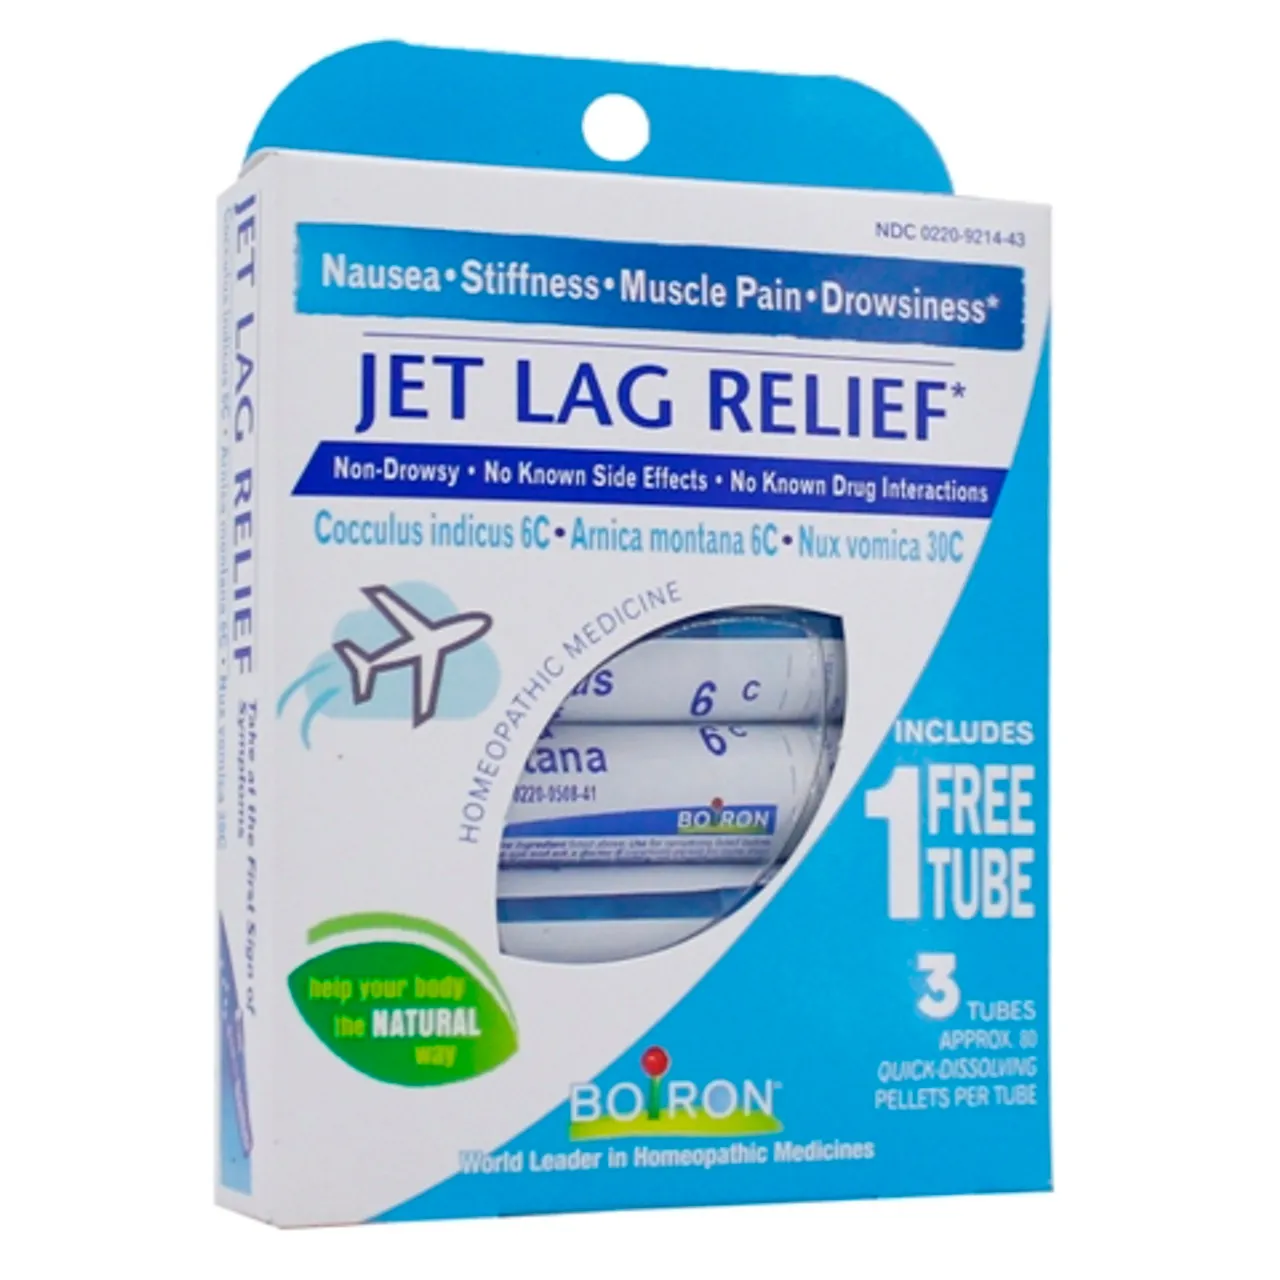 Boiron - From: 30306969214436 To: 306969214435 - Jet Lag Relief Bonus Care Pack